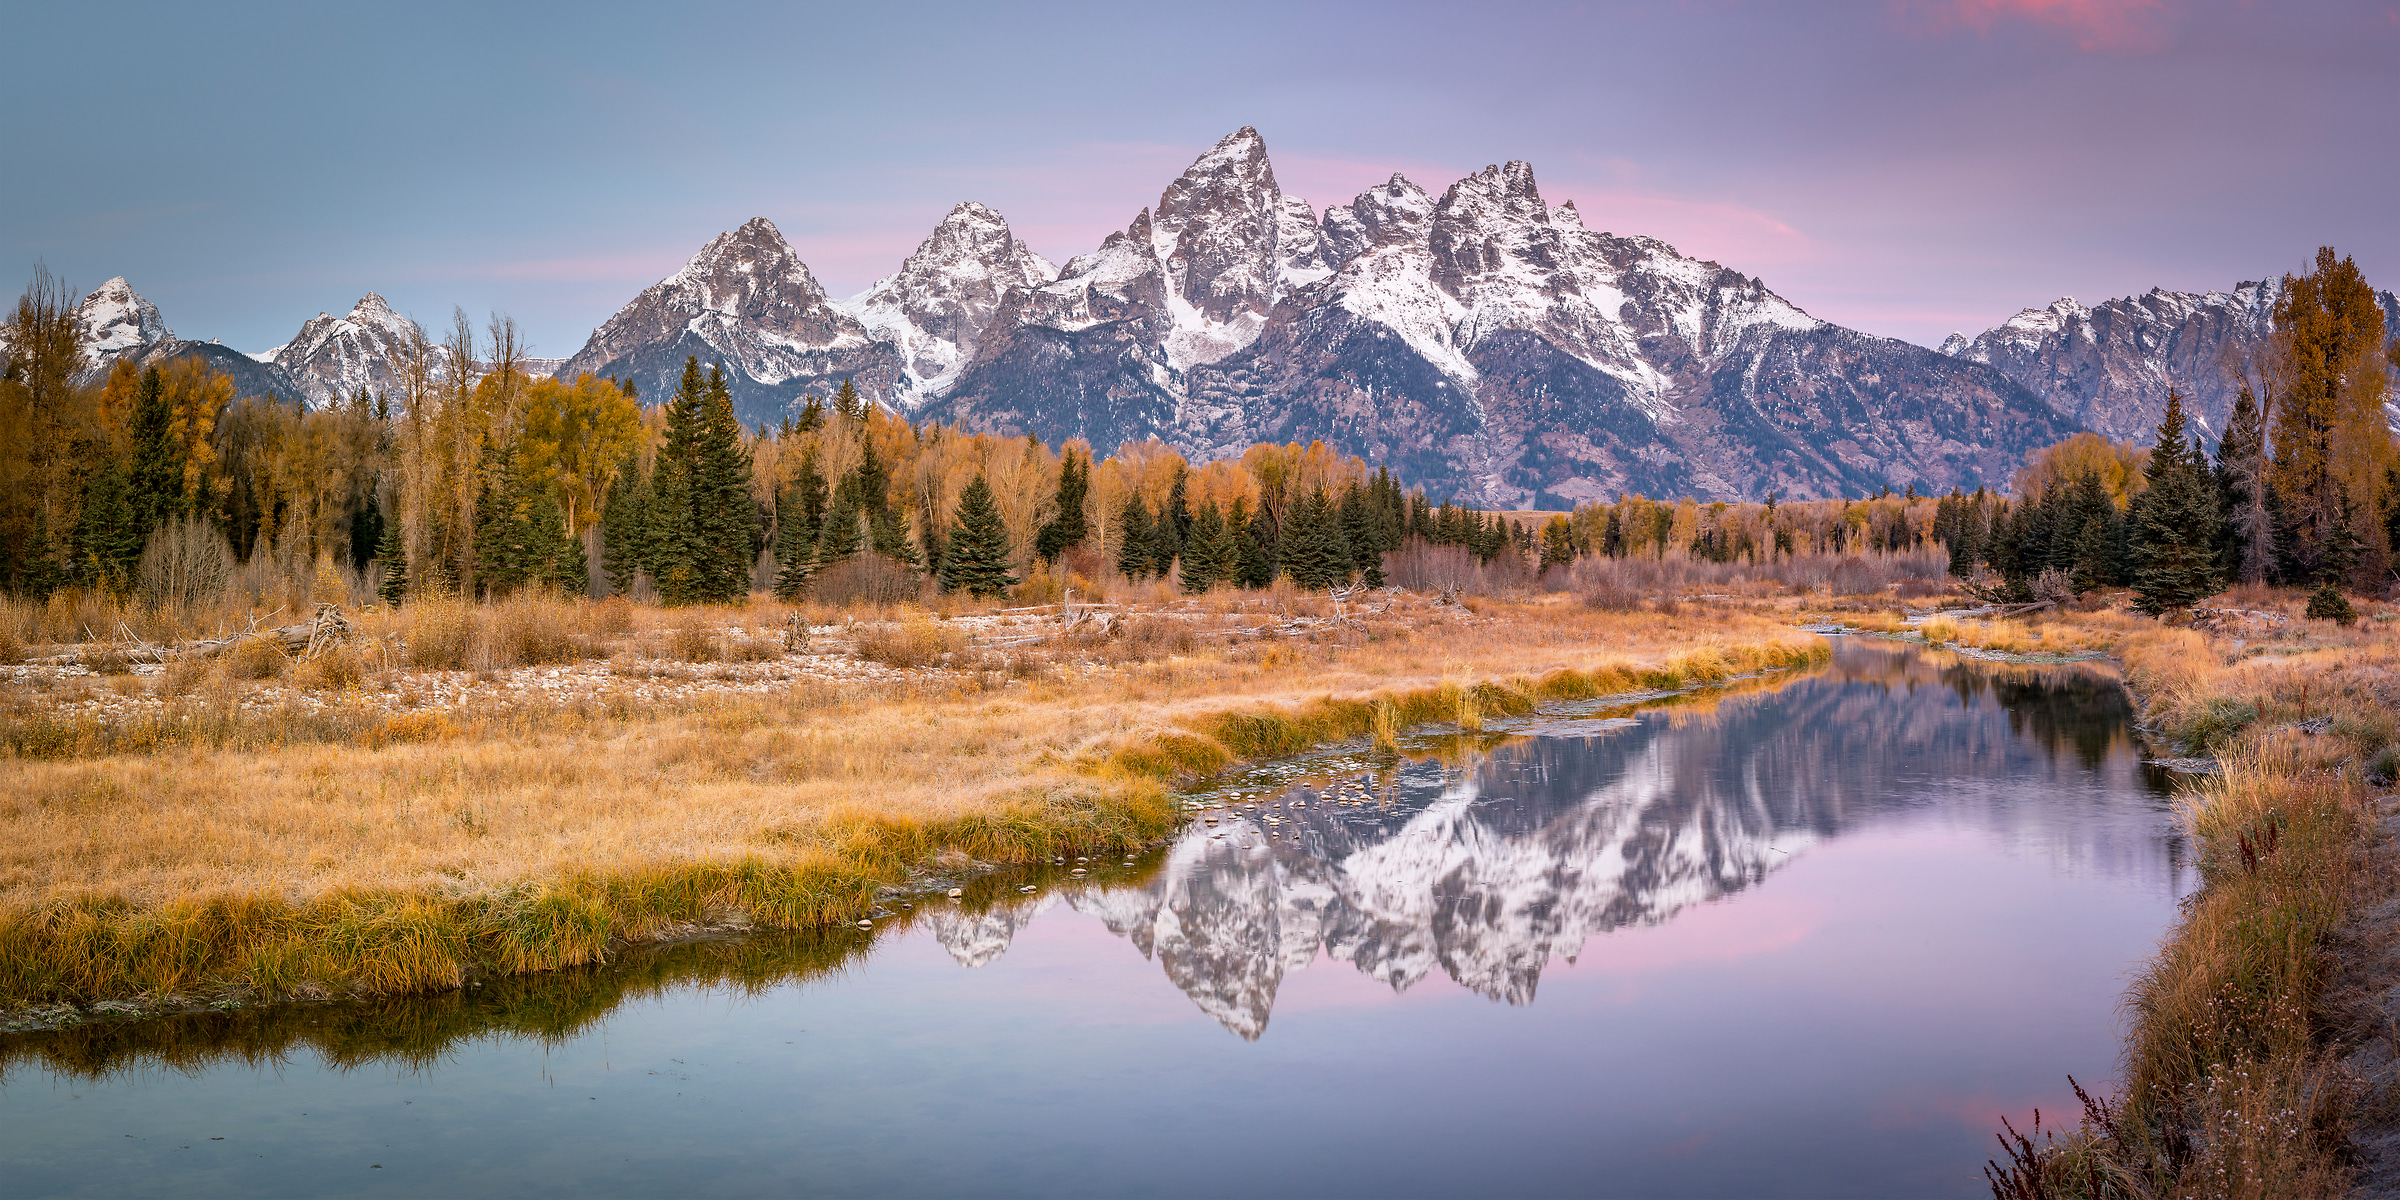 266 megapixels! A very high resolution, large-format VAST photo print of a mountain landscape scene at dawn with the Grand Tetons, a river, and a forest with autumn foliage; landscape photo created by Justin Katz in Grand Teton National Park, Wyoming